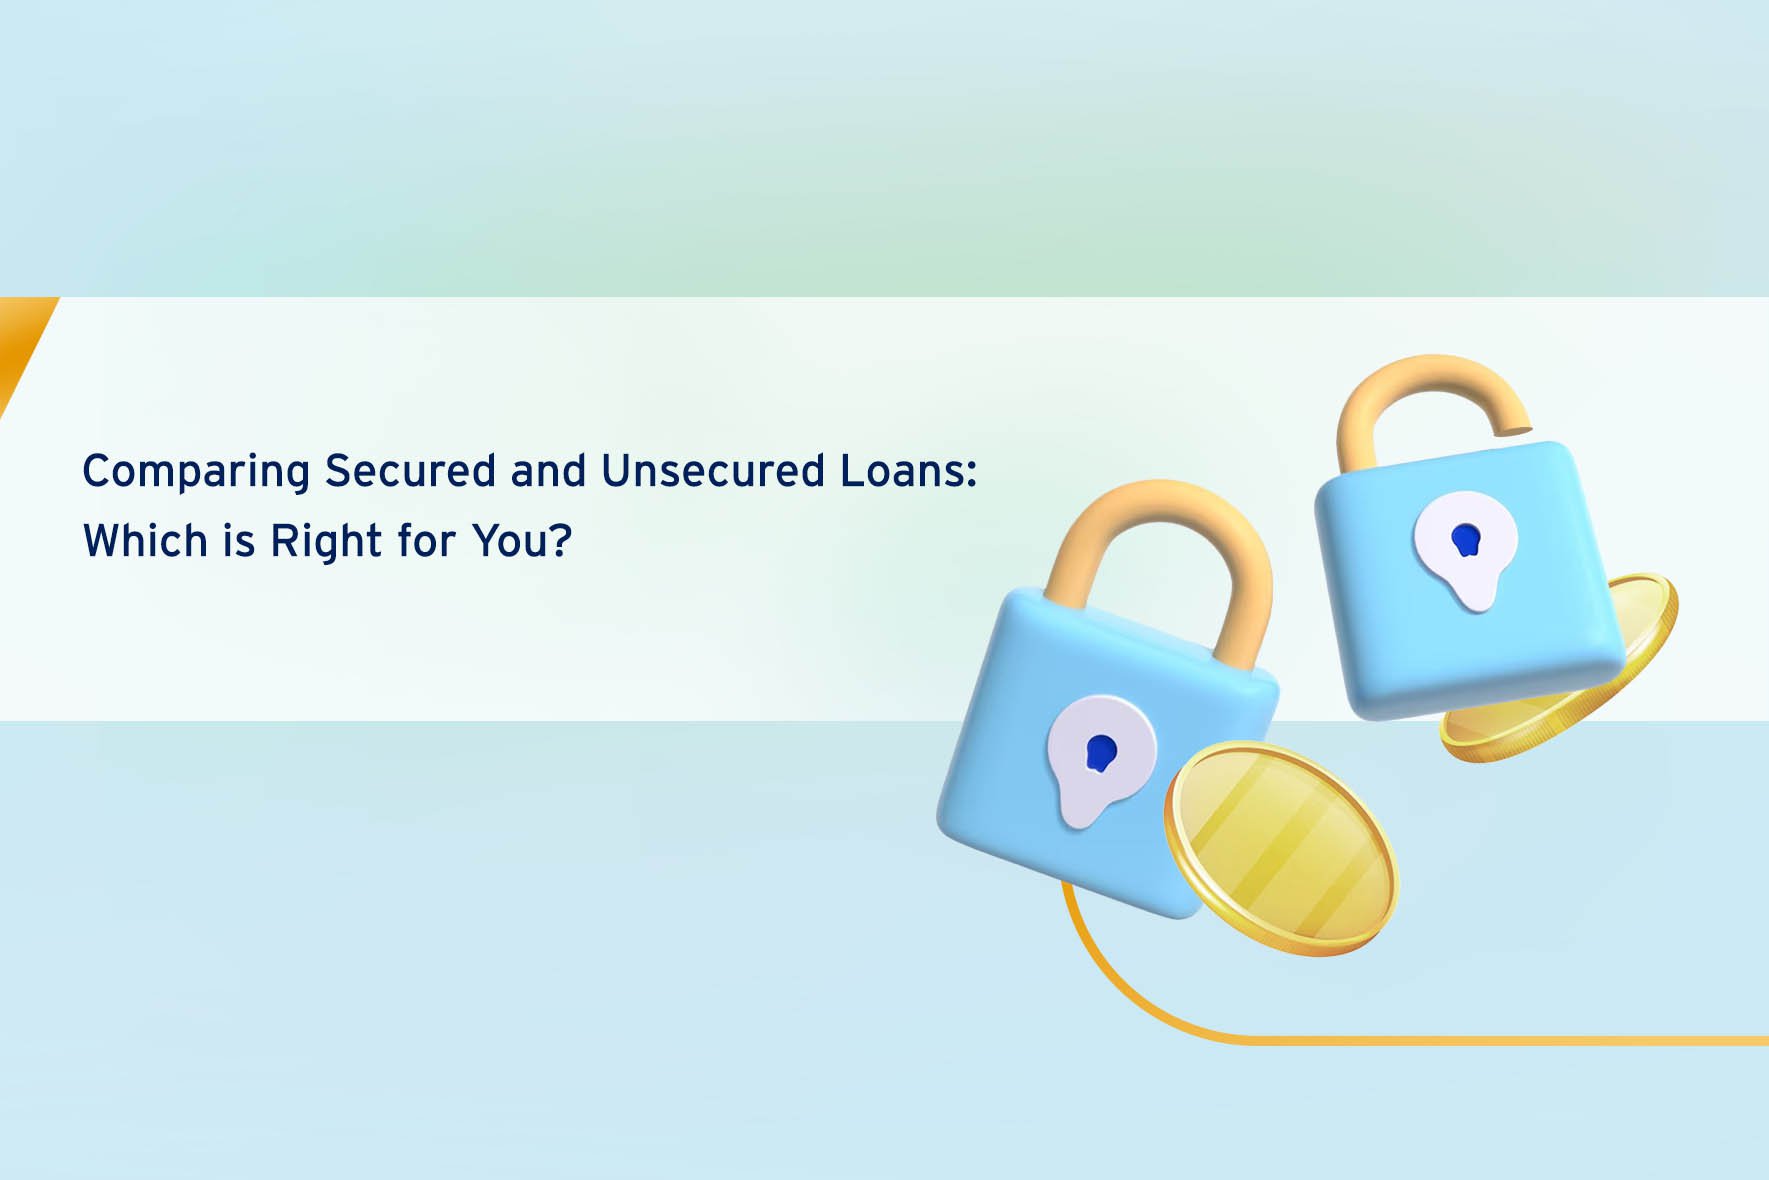 Comparing Secured and Unsecured Loans: Which is Right for You?